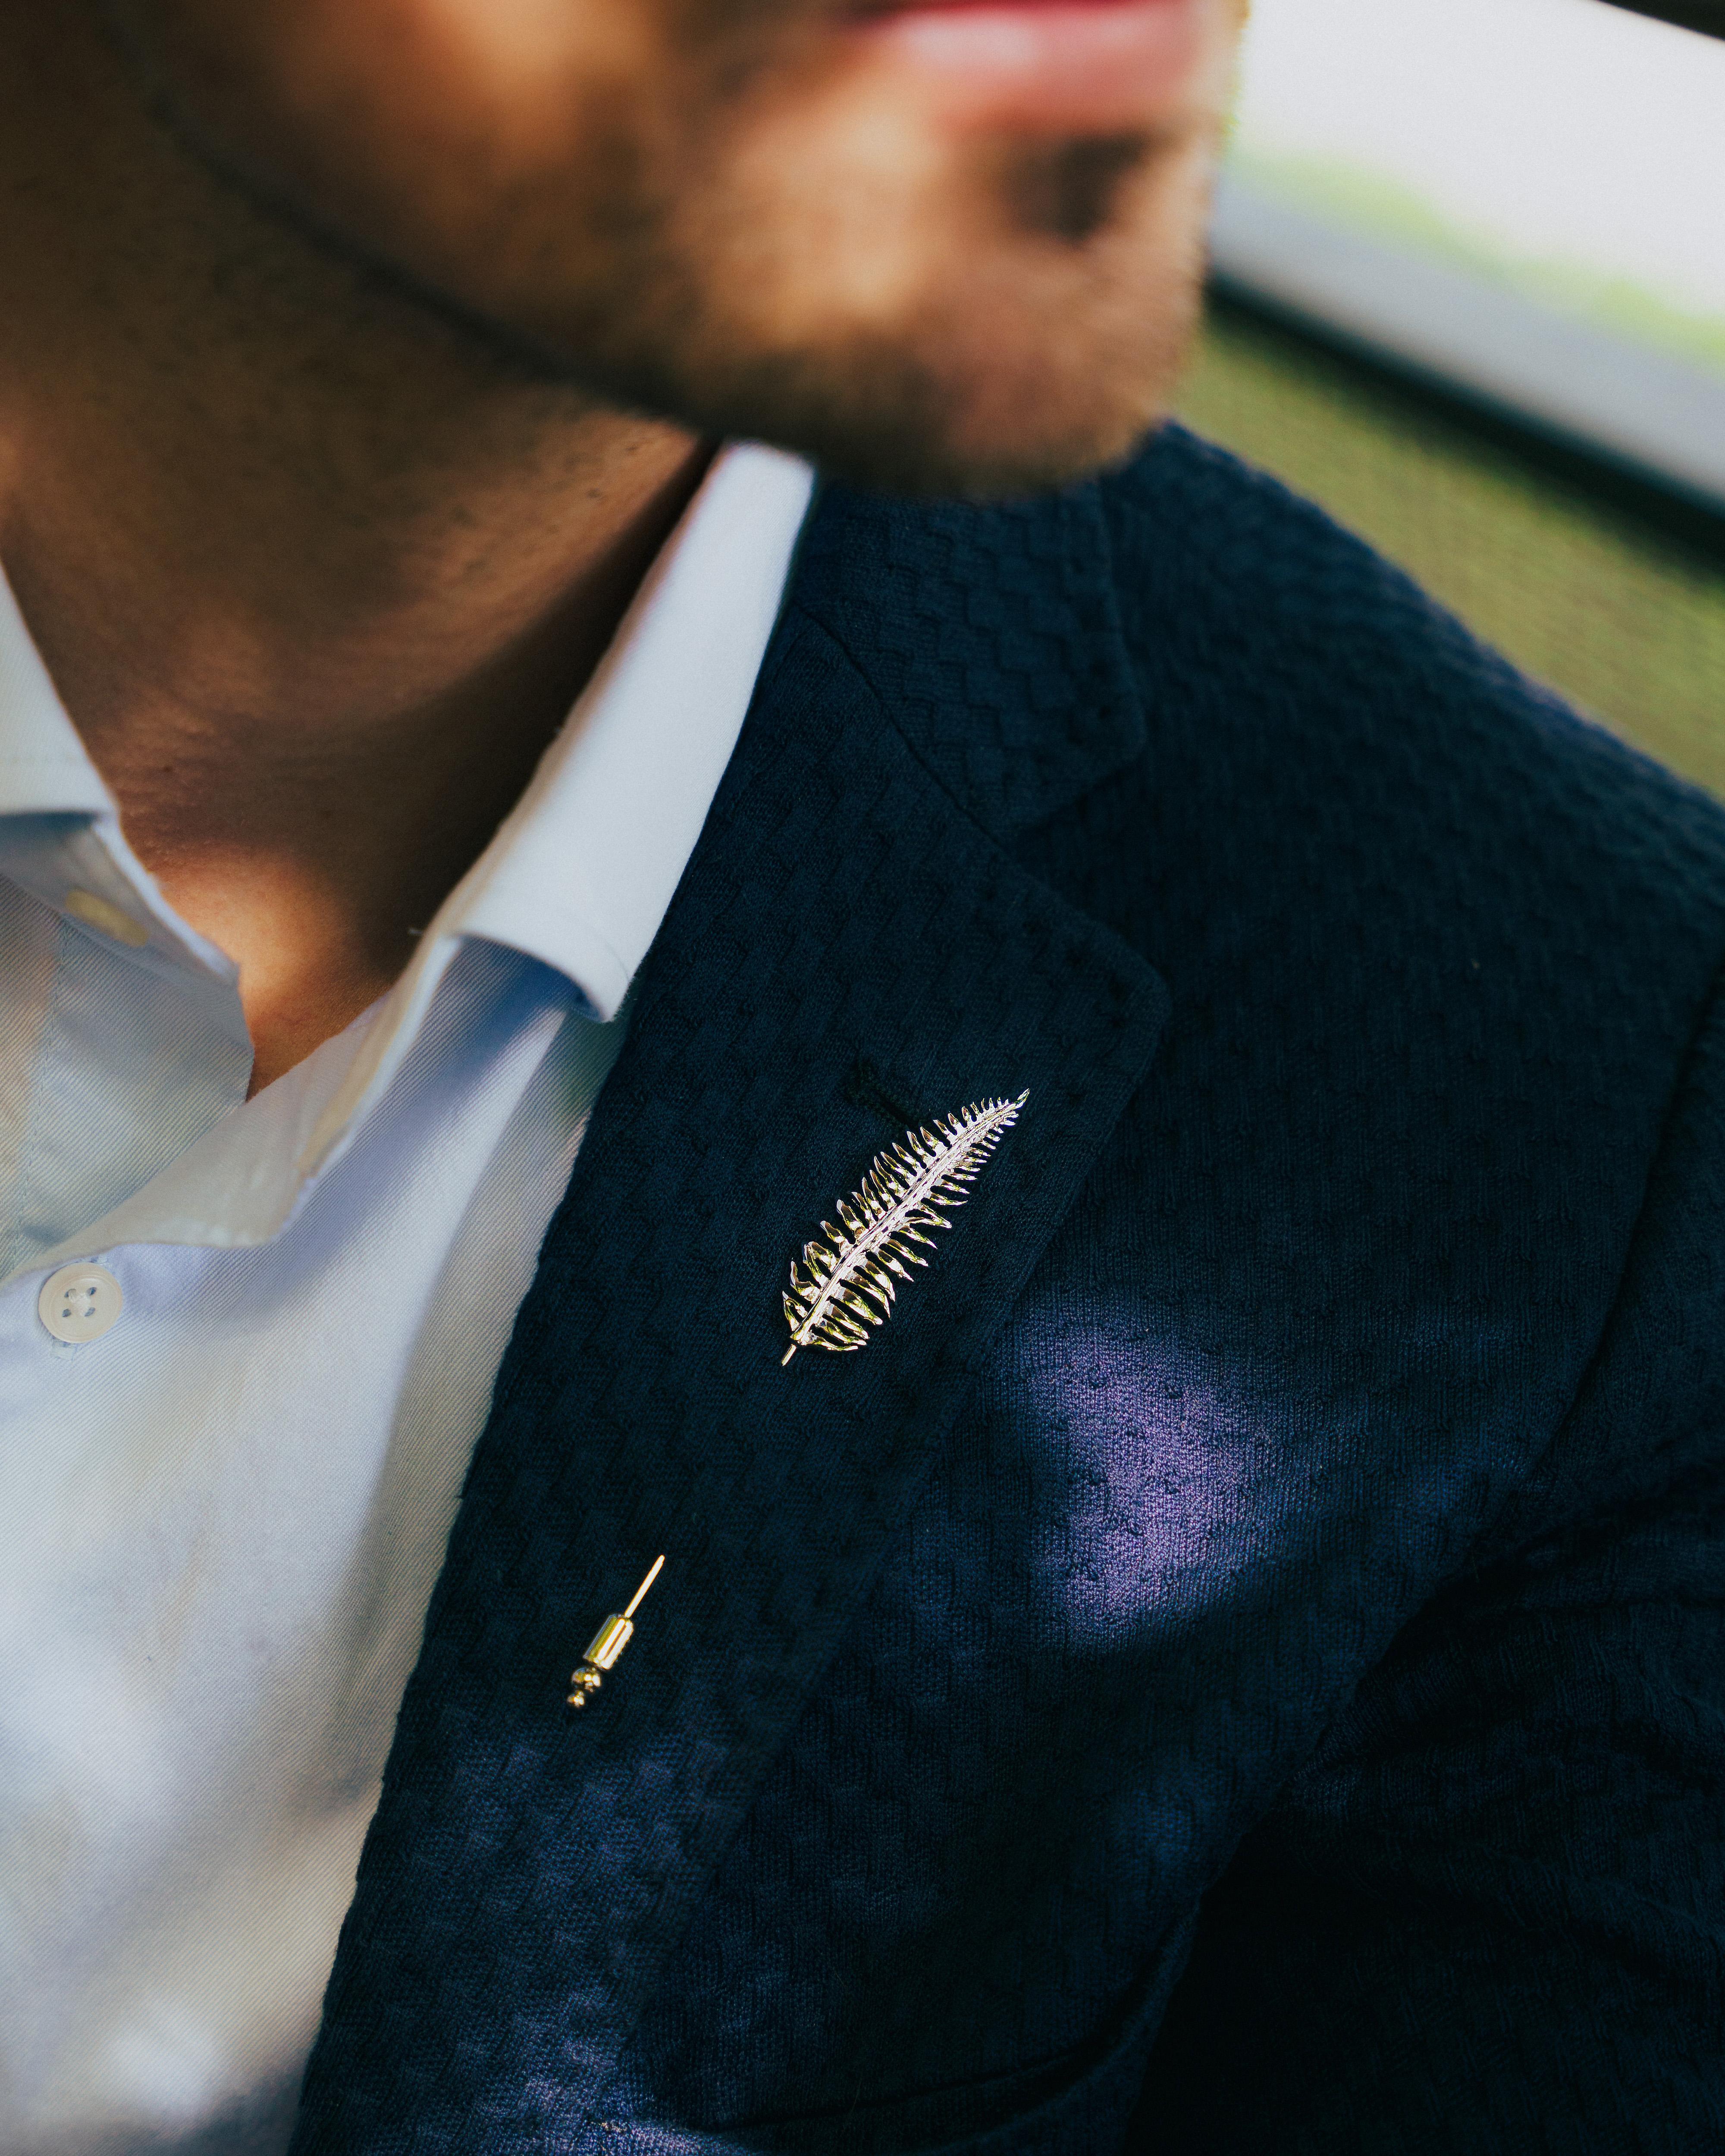 Fern lapel pin with rhodium finish

Conveying the texture and shape of a fern leaf set in rhodium plated base metal. A highly-polished finish creates a surface which catches the natural light and leaves your suit refreshed with a subtle shine. The